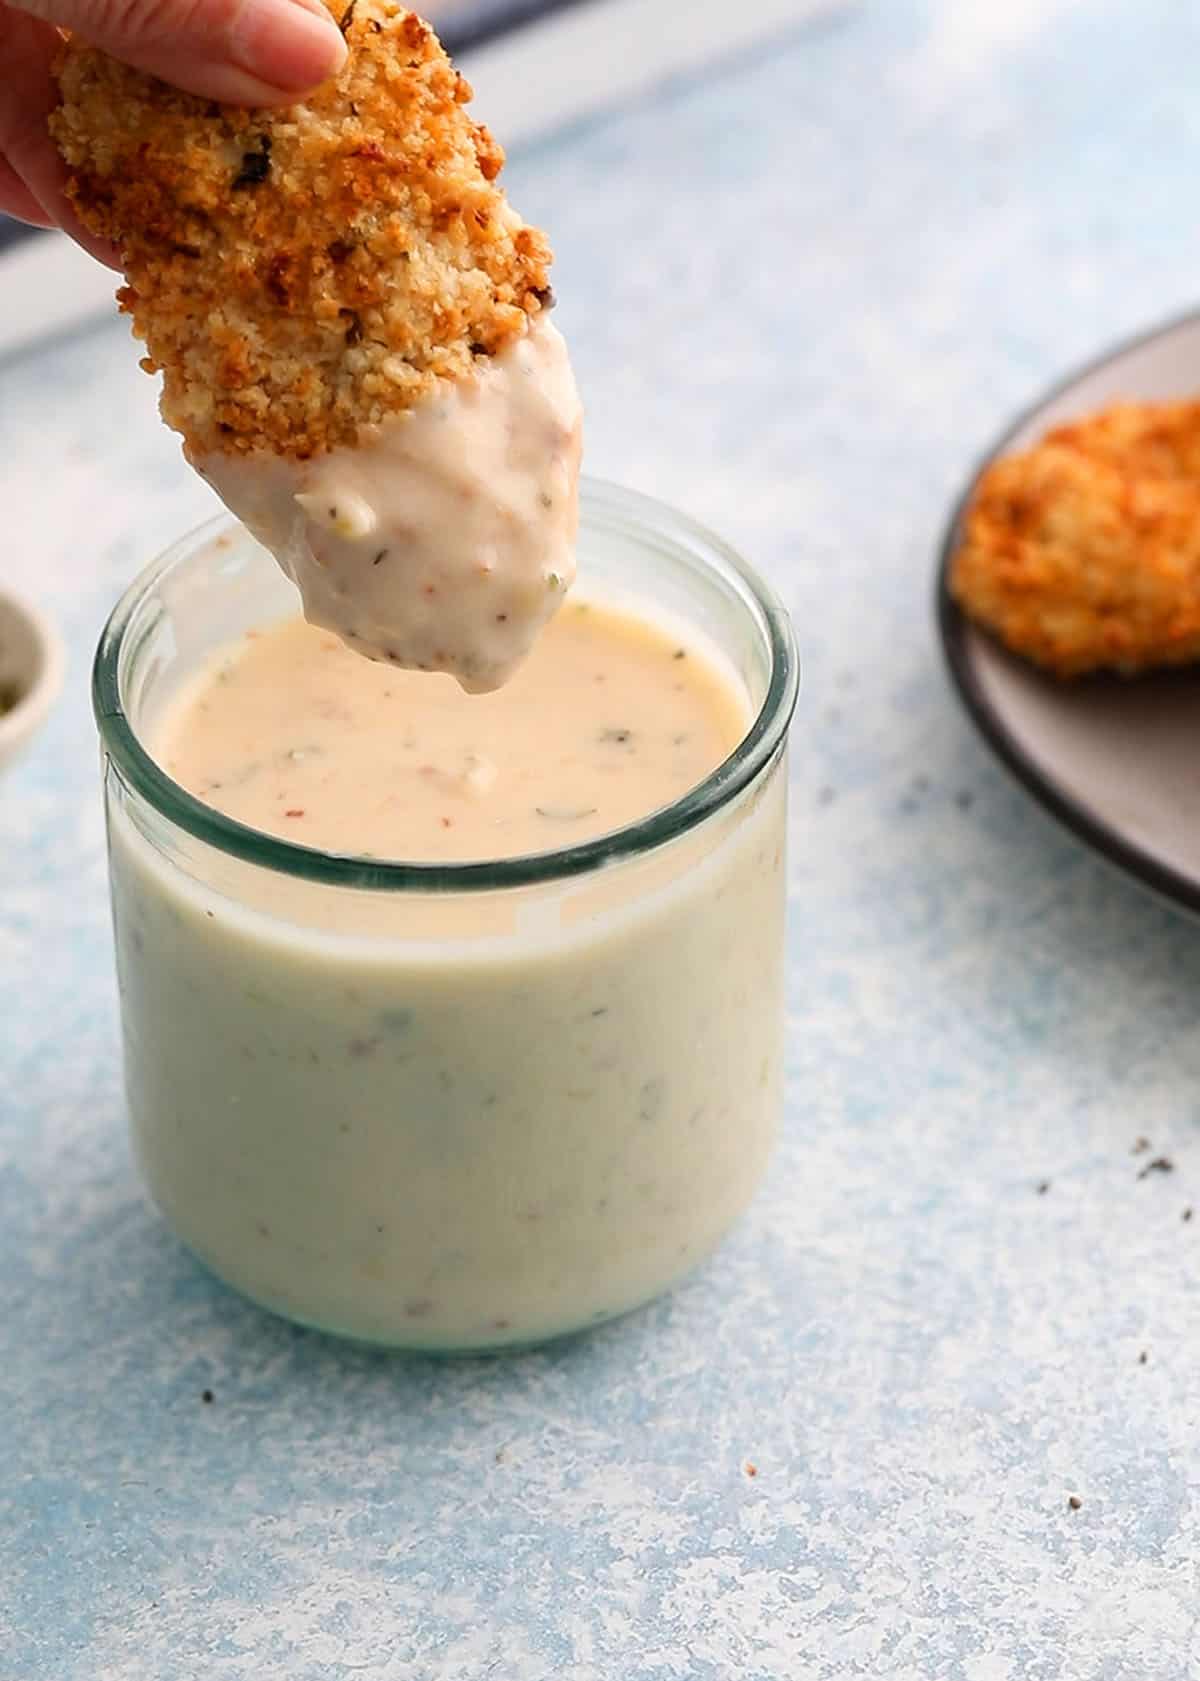 a hand holding one breaded chicken tender dipped in white sauce.